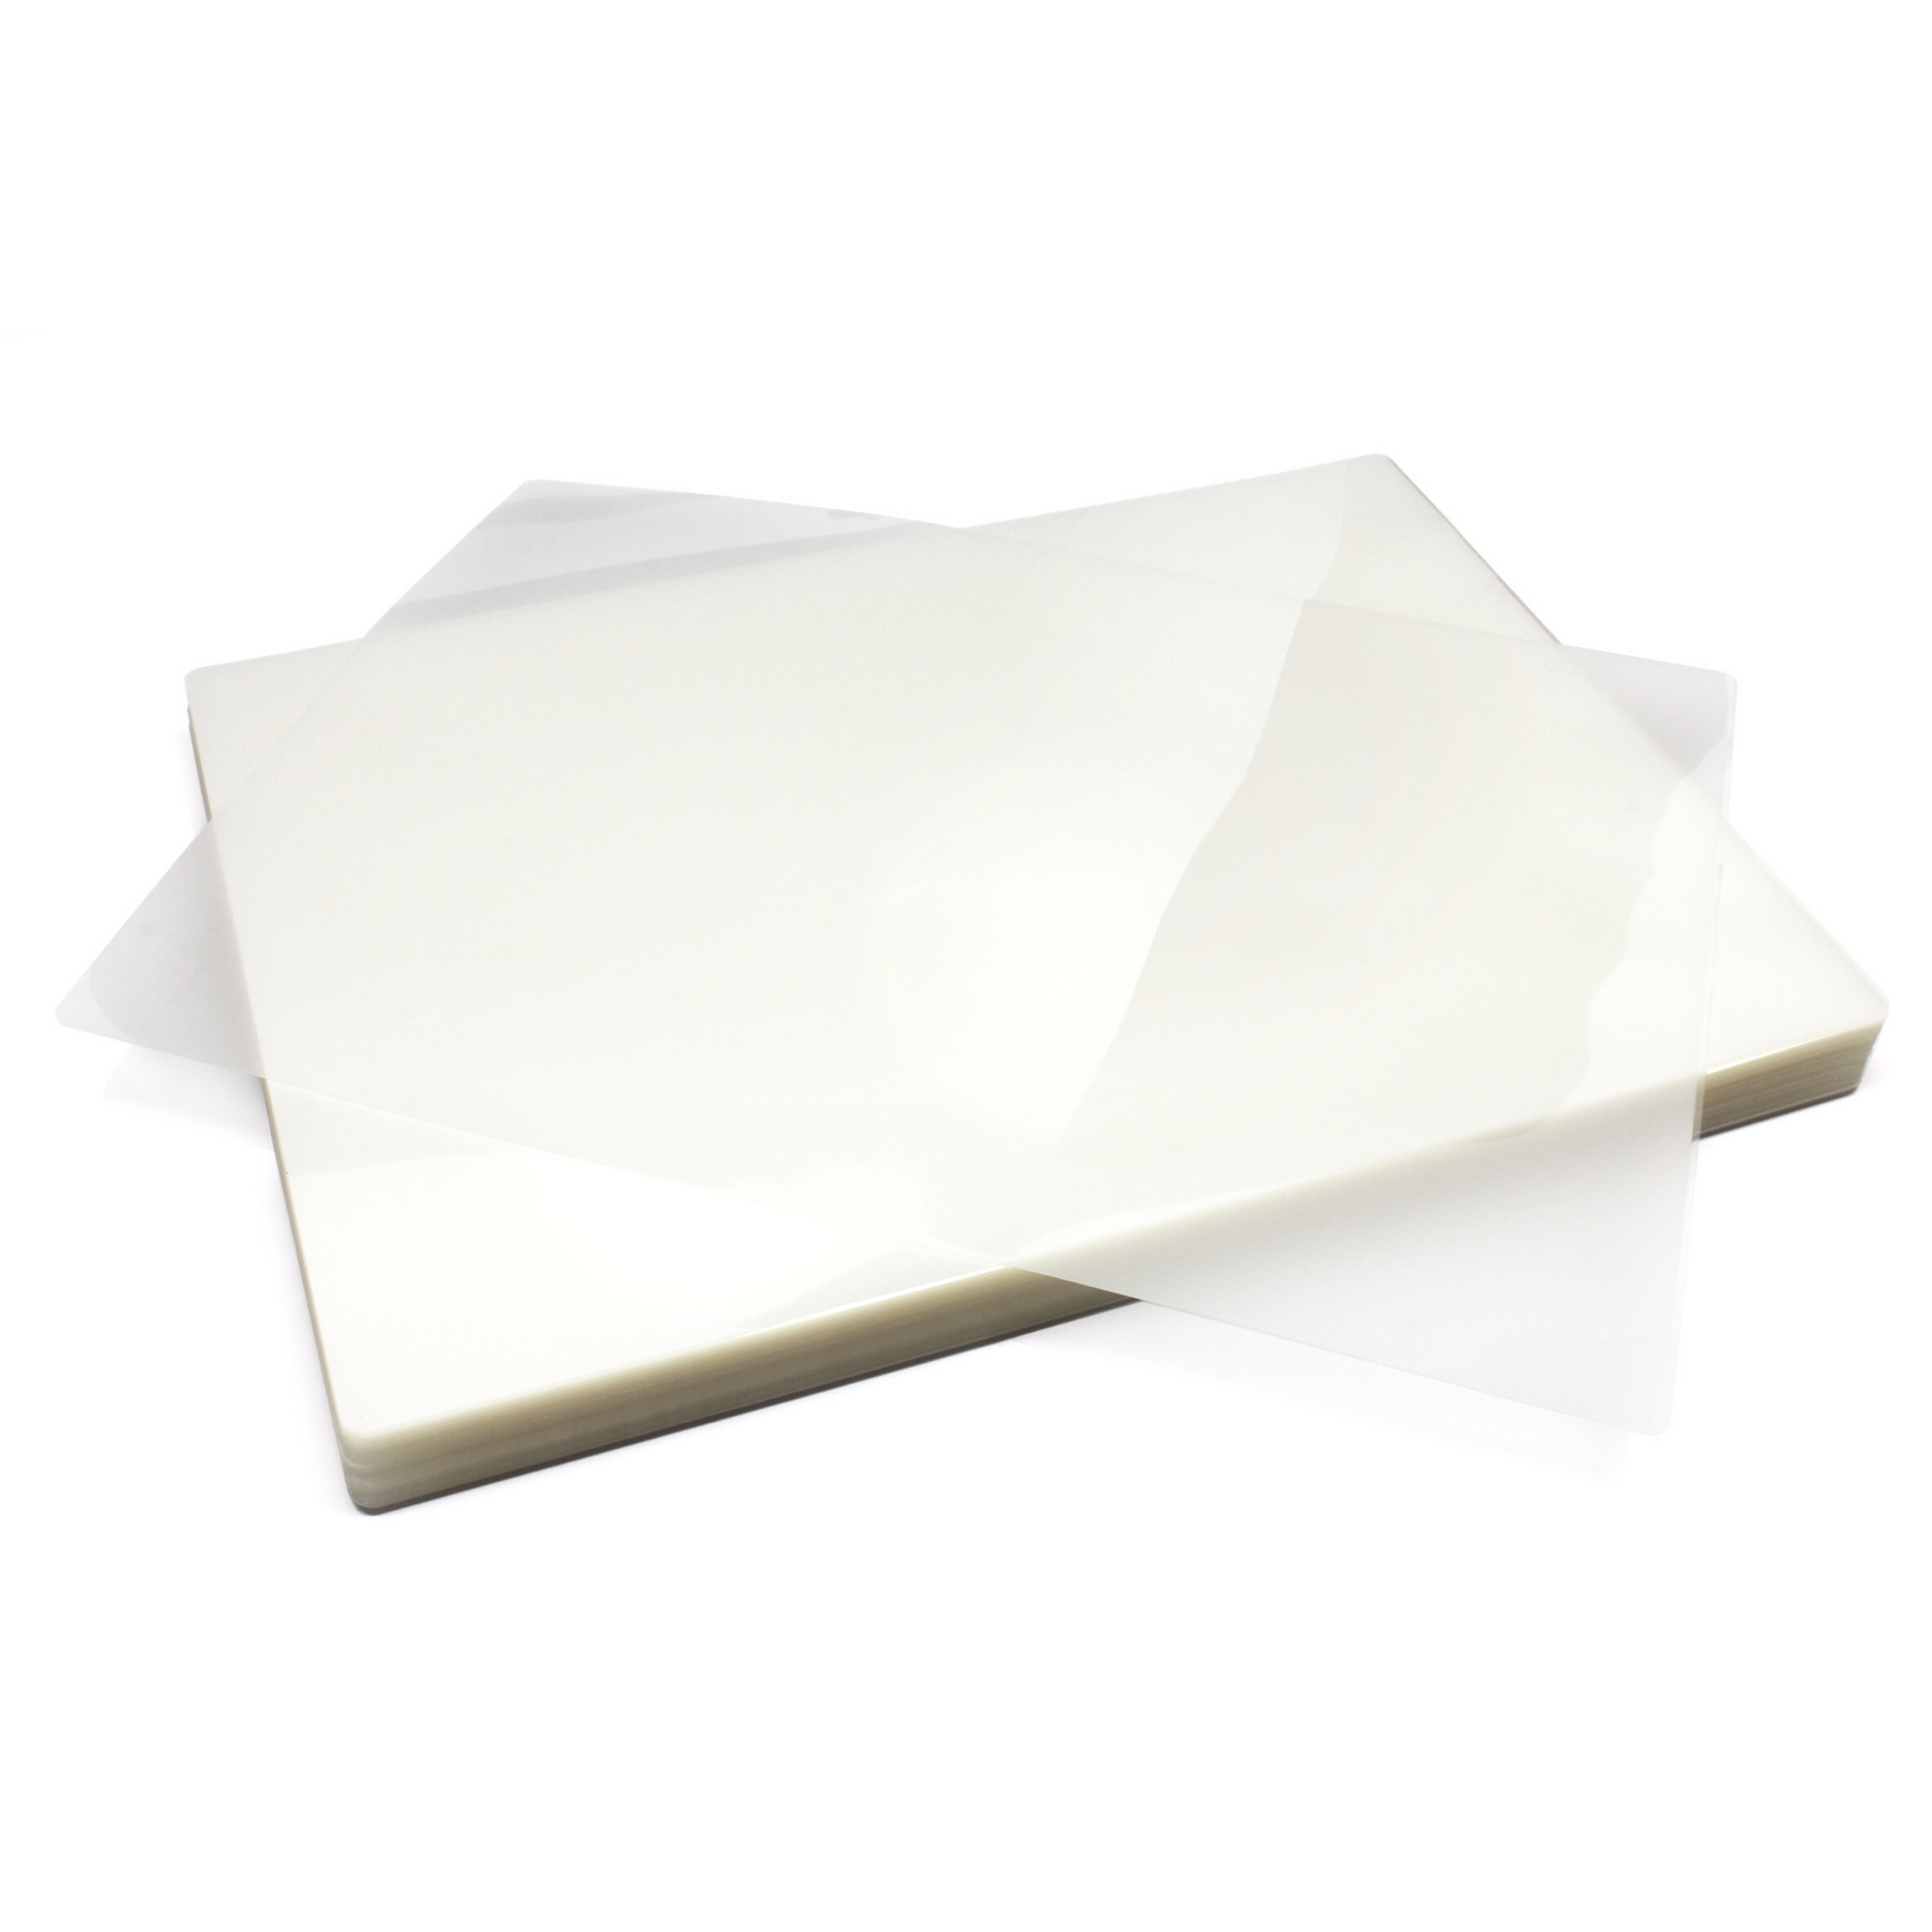 Several A5 gloss laminating pouches with a 150 micron thickness, fanned out on a white surface, highlighting the sheen and transparency of the material.